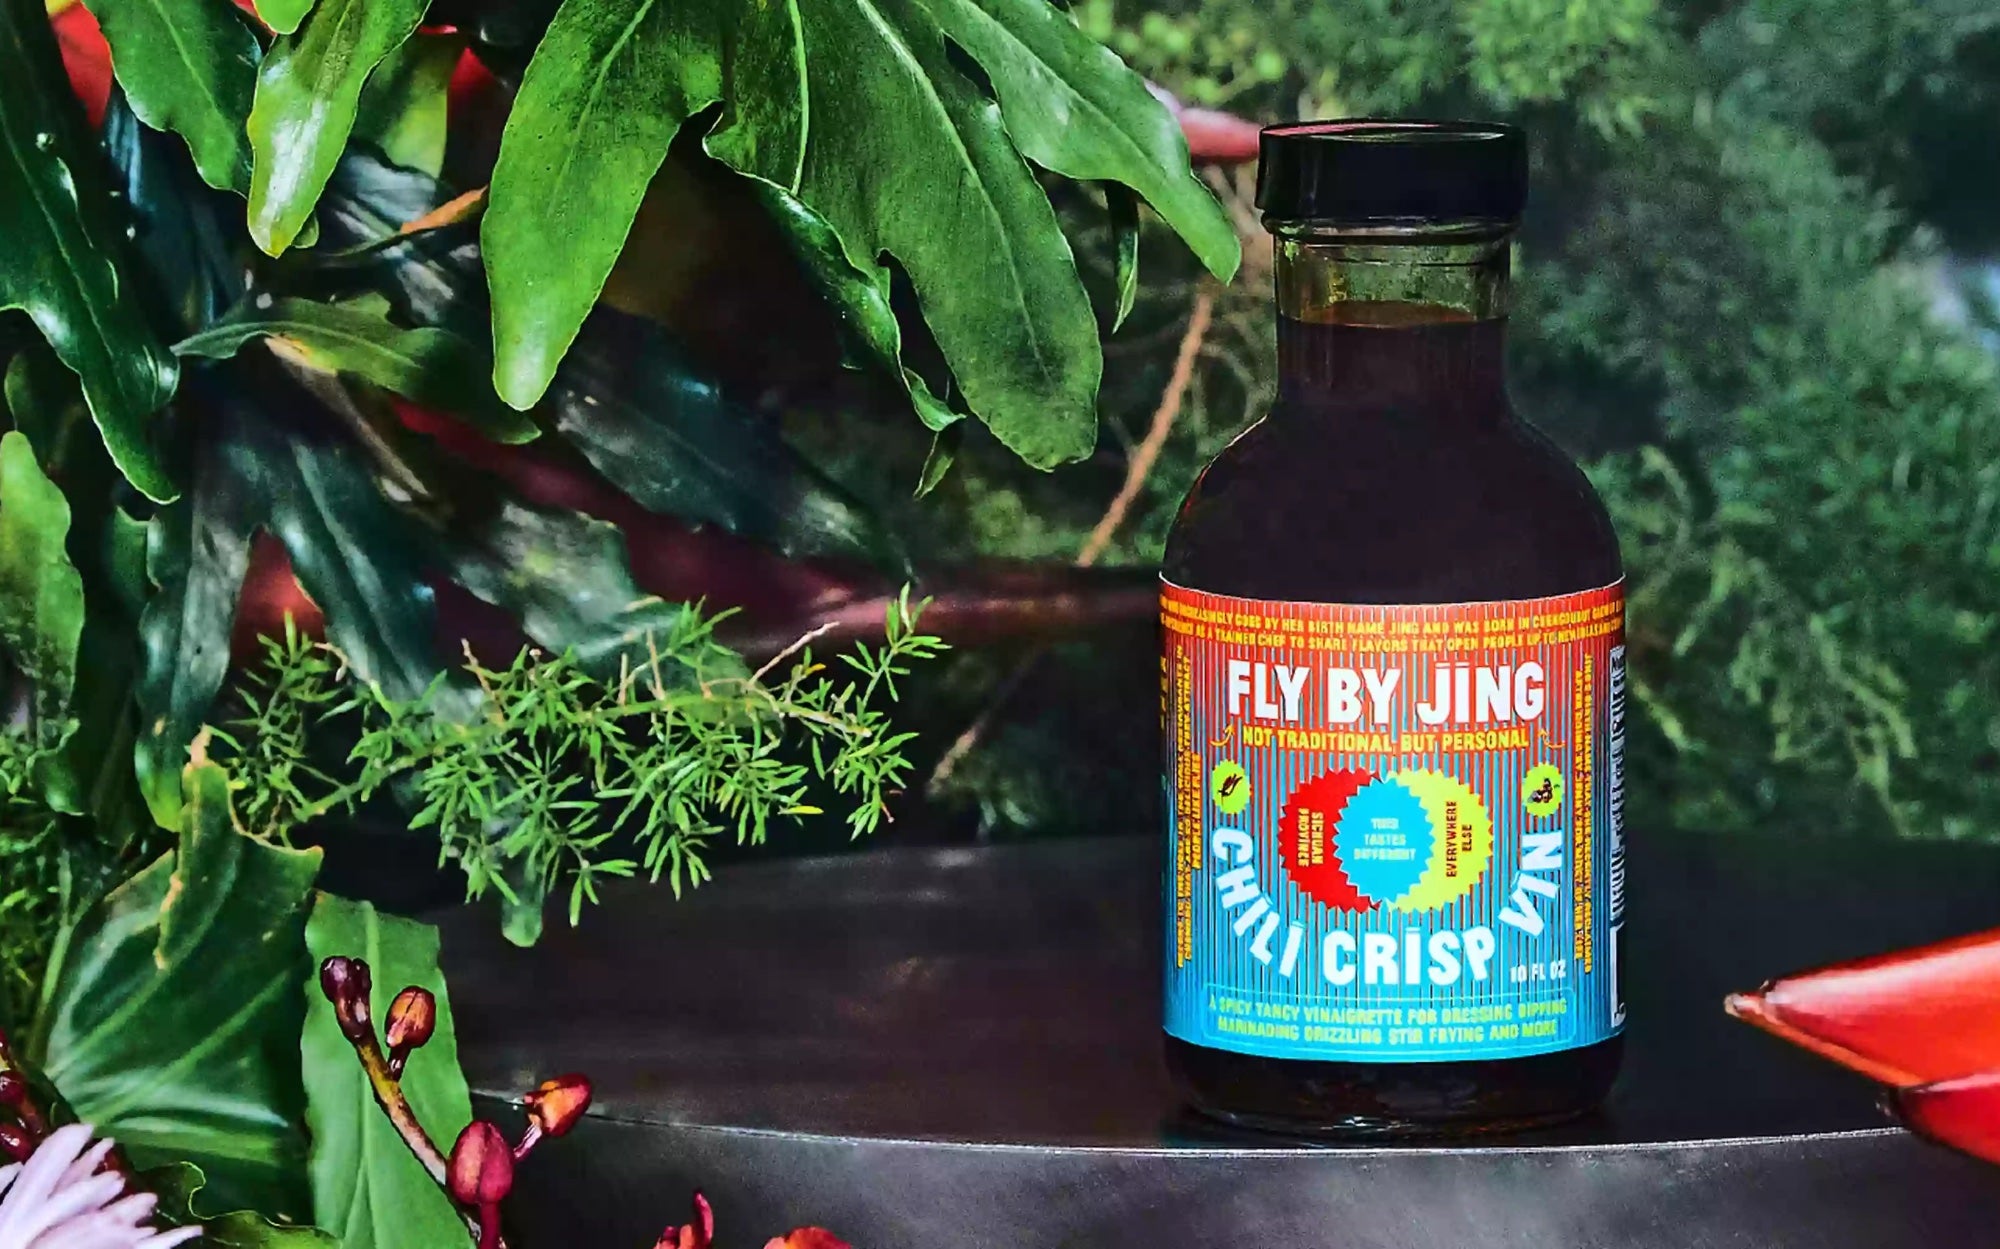 Fly by Jing bottled sauce against a foliage background